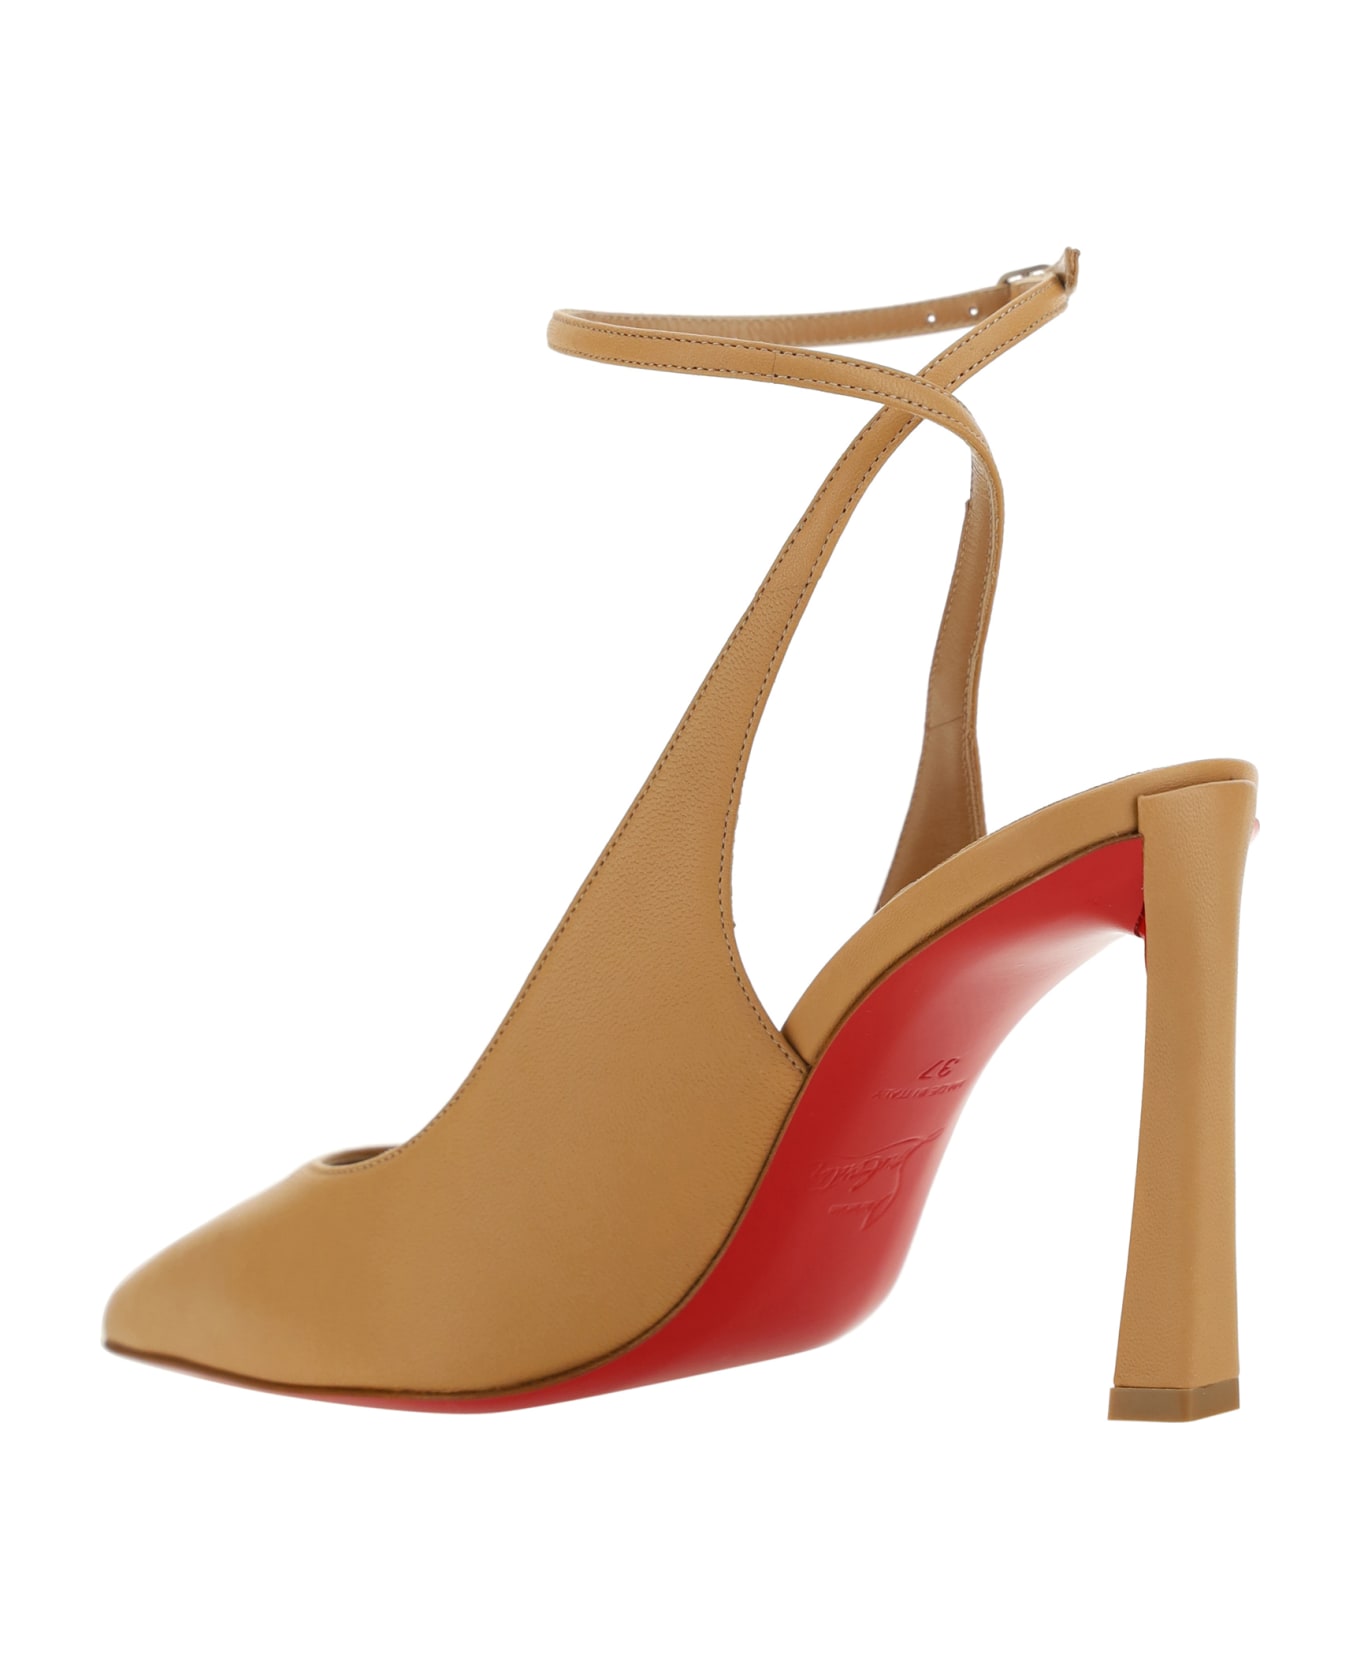 Christian Louboutin Condora Strap Pumps - Toffee/lin Toffee ハイヒール